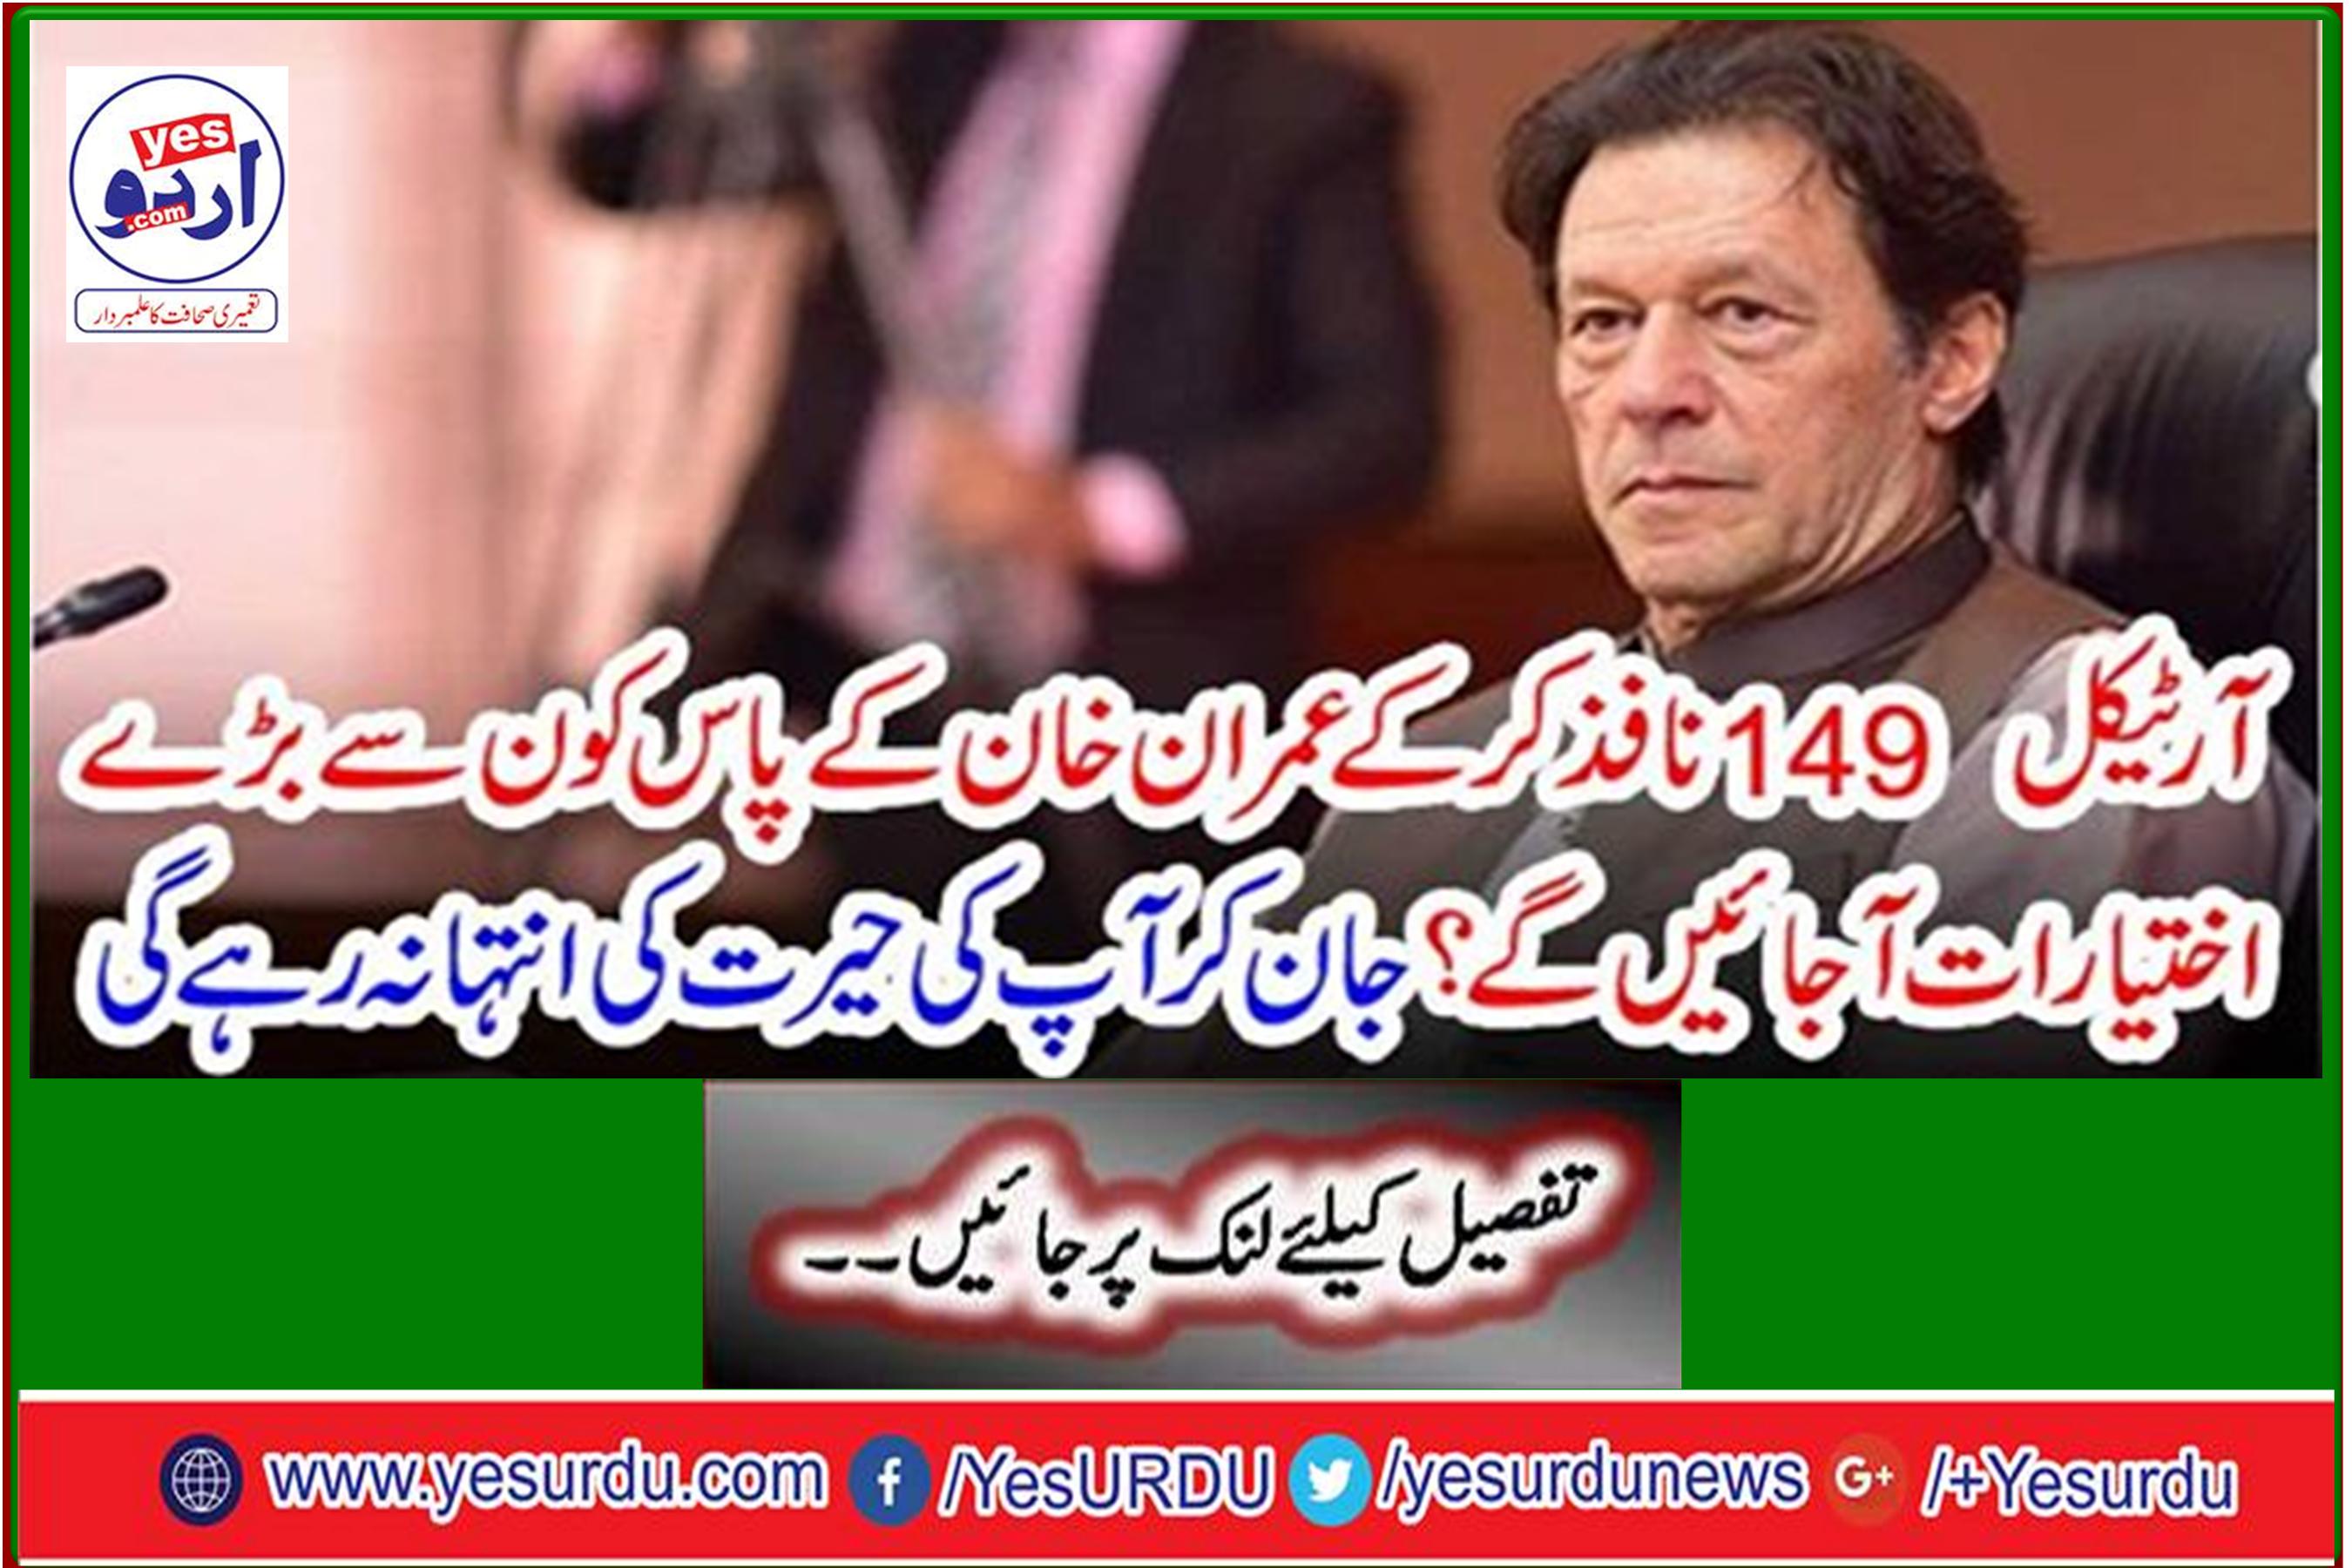 Article 149 What great powers will Imran Khan come up with? Knowing that will not end your surprise